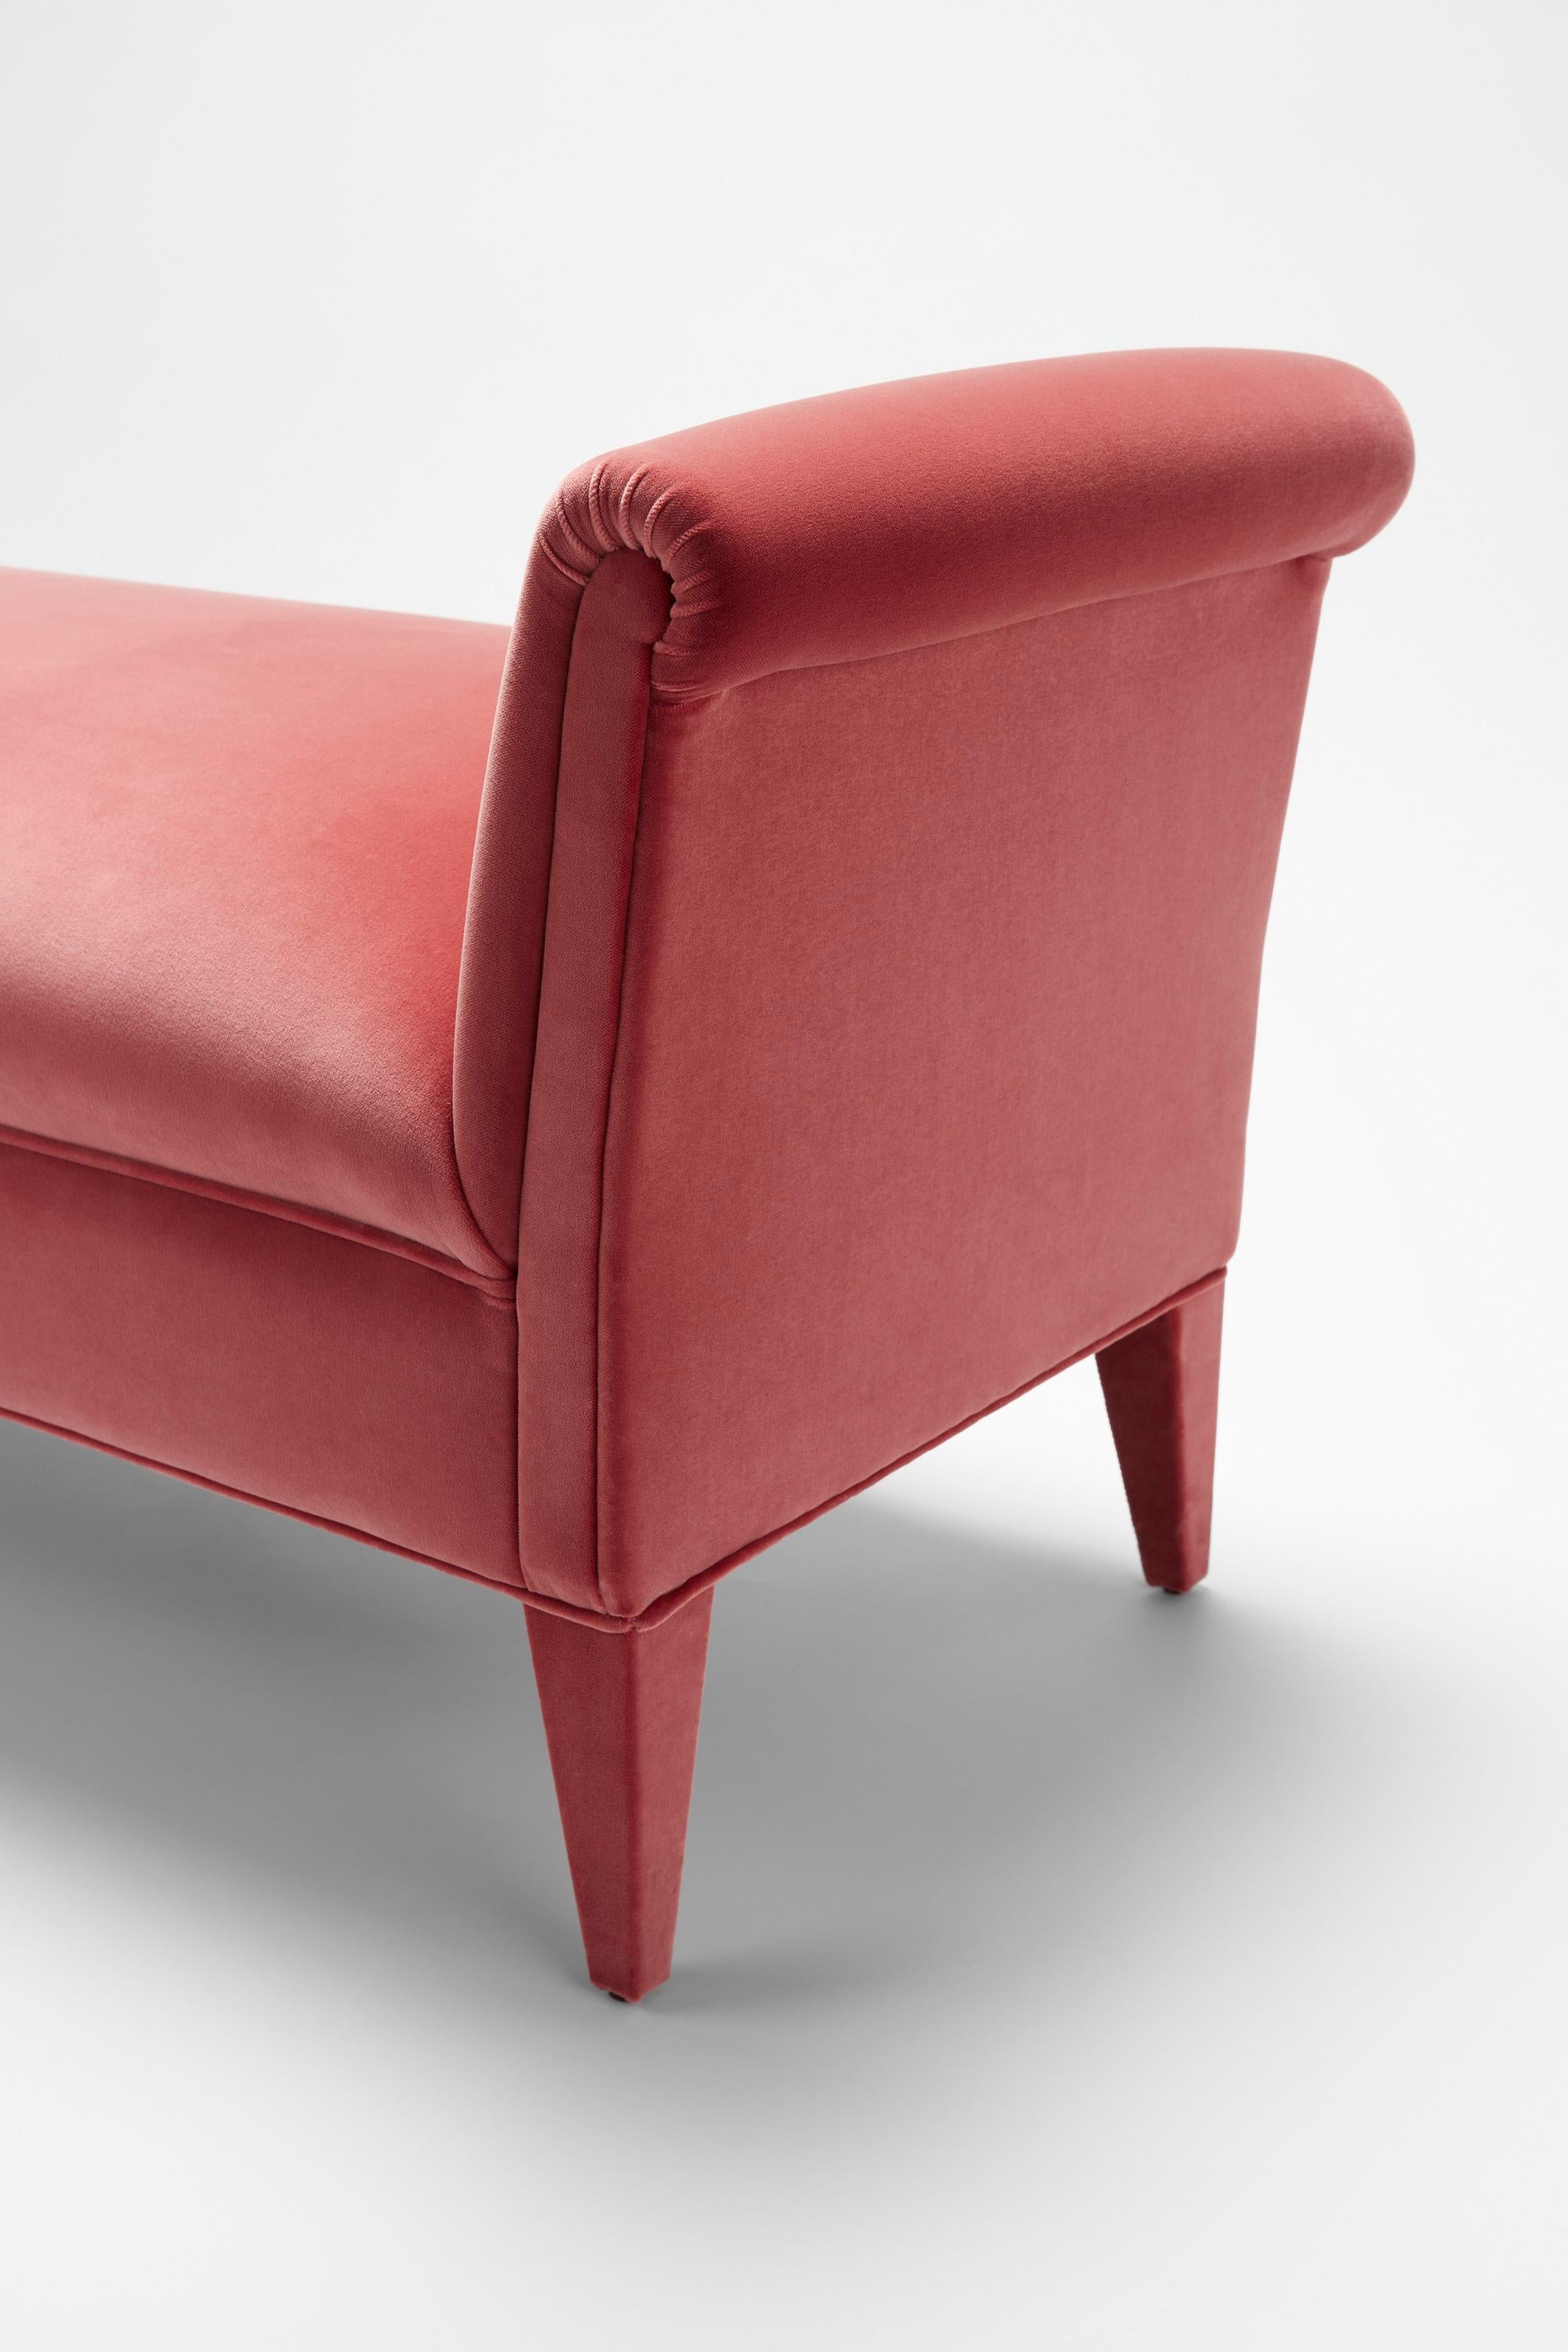 English Contemporary Eto Bench in Coral cotton velvet with upholstered legs For Sale